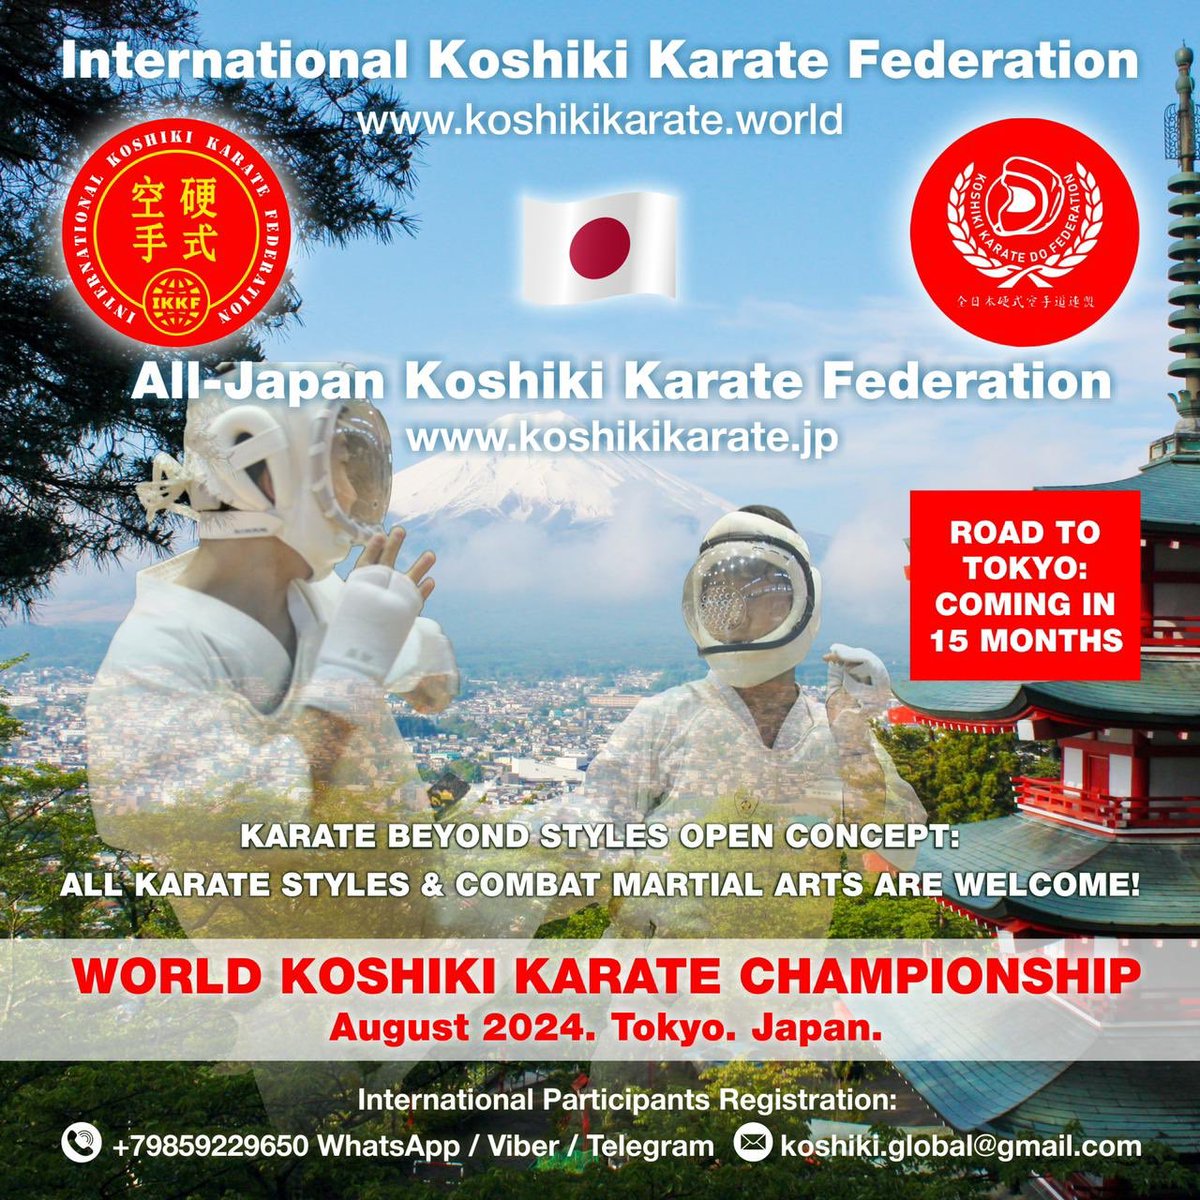 COMING IN 15 MONTHS 🔥 Open for all karate styles & combat martial arts! Free application: KOSHIKI.GLOBAL@GMAIL.COM #koshikikarate #karatebeyondstyles #sports #event #promotion #硬式空手 #空手